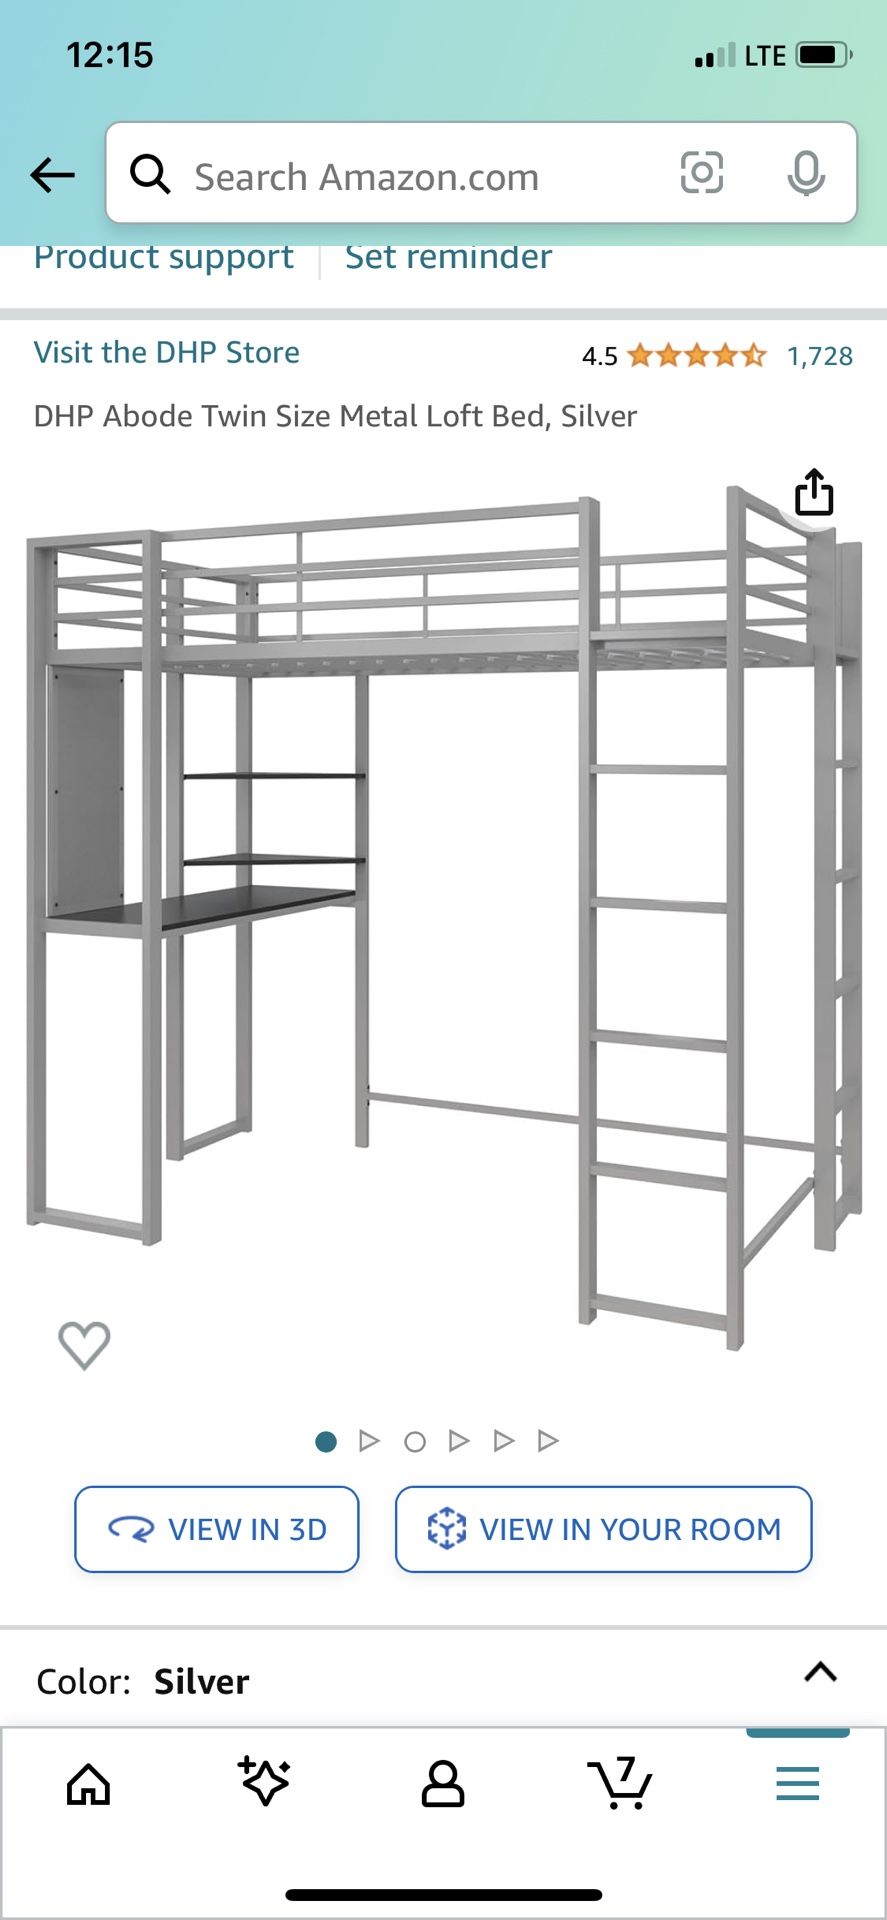 DHP Abode Twin Size Metal Loft Bed